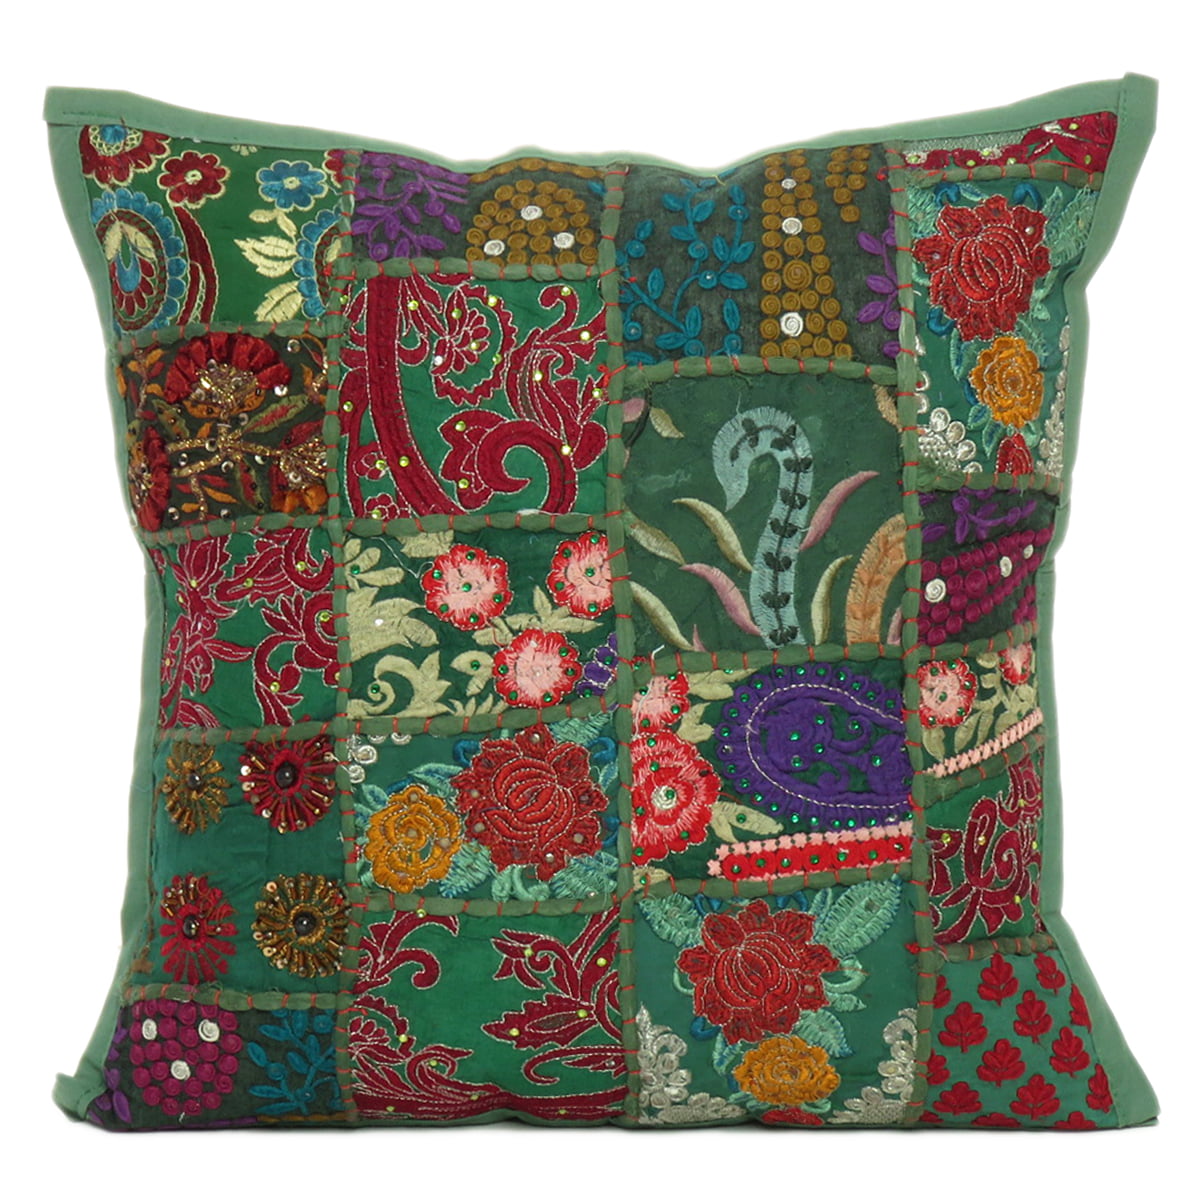 Decorative Cushion Covers Embroidered Throw Pillows for Sofa Couch ...